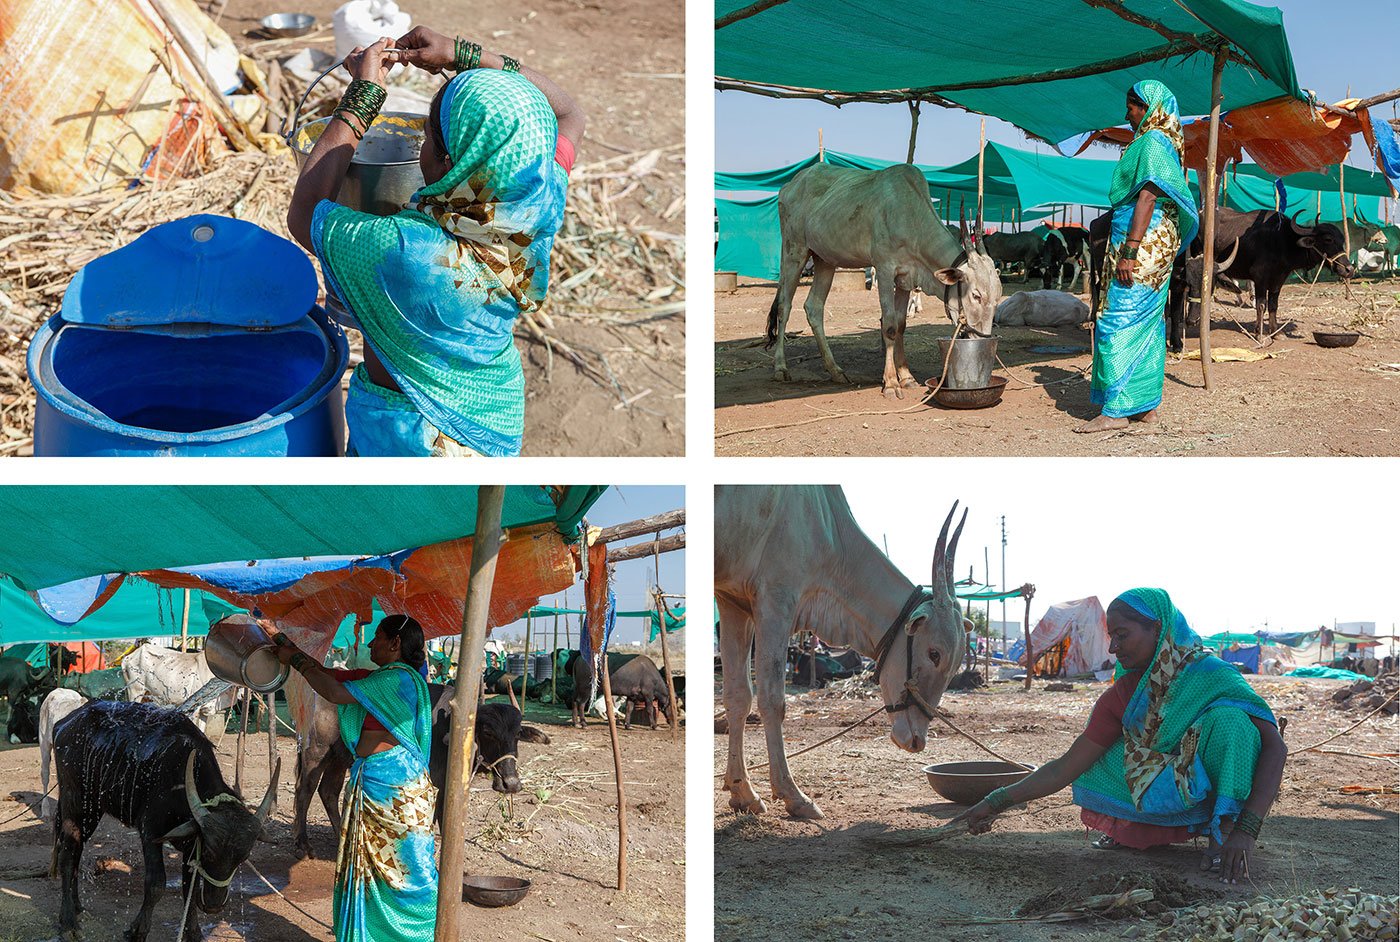 Top Left- Lakshmi filling water for her cattle from a drum next to her tent
Top Right - Lakhshmi making her cow drink water
Bottom Left - Lakshmi pouring water on the cow, presumably to cool it down
Bottom Right - Lakshmi sweeping dung into a pile to keep the area clean
